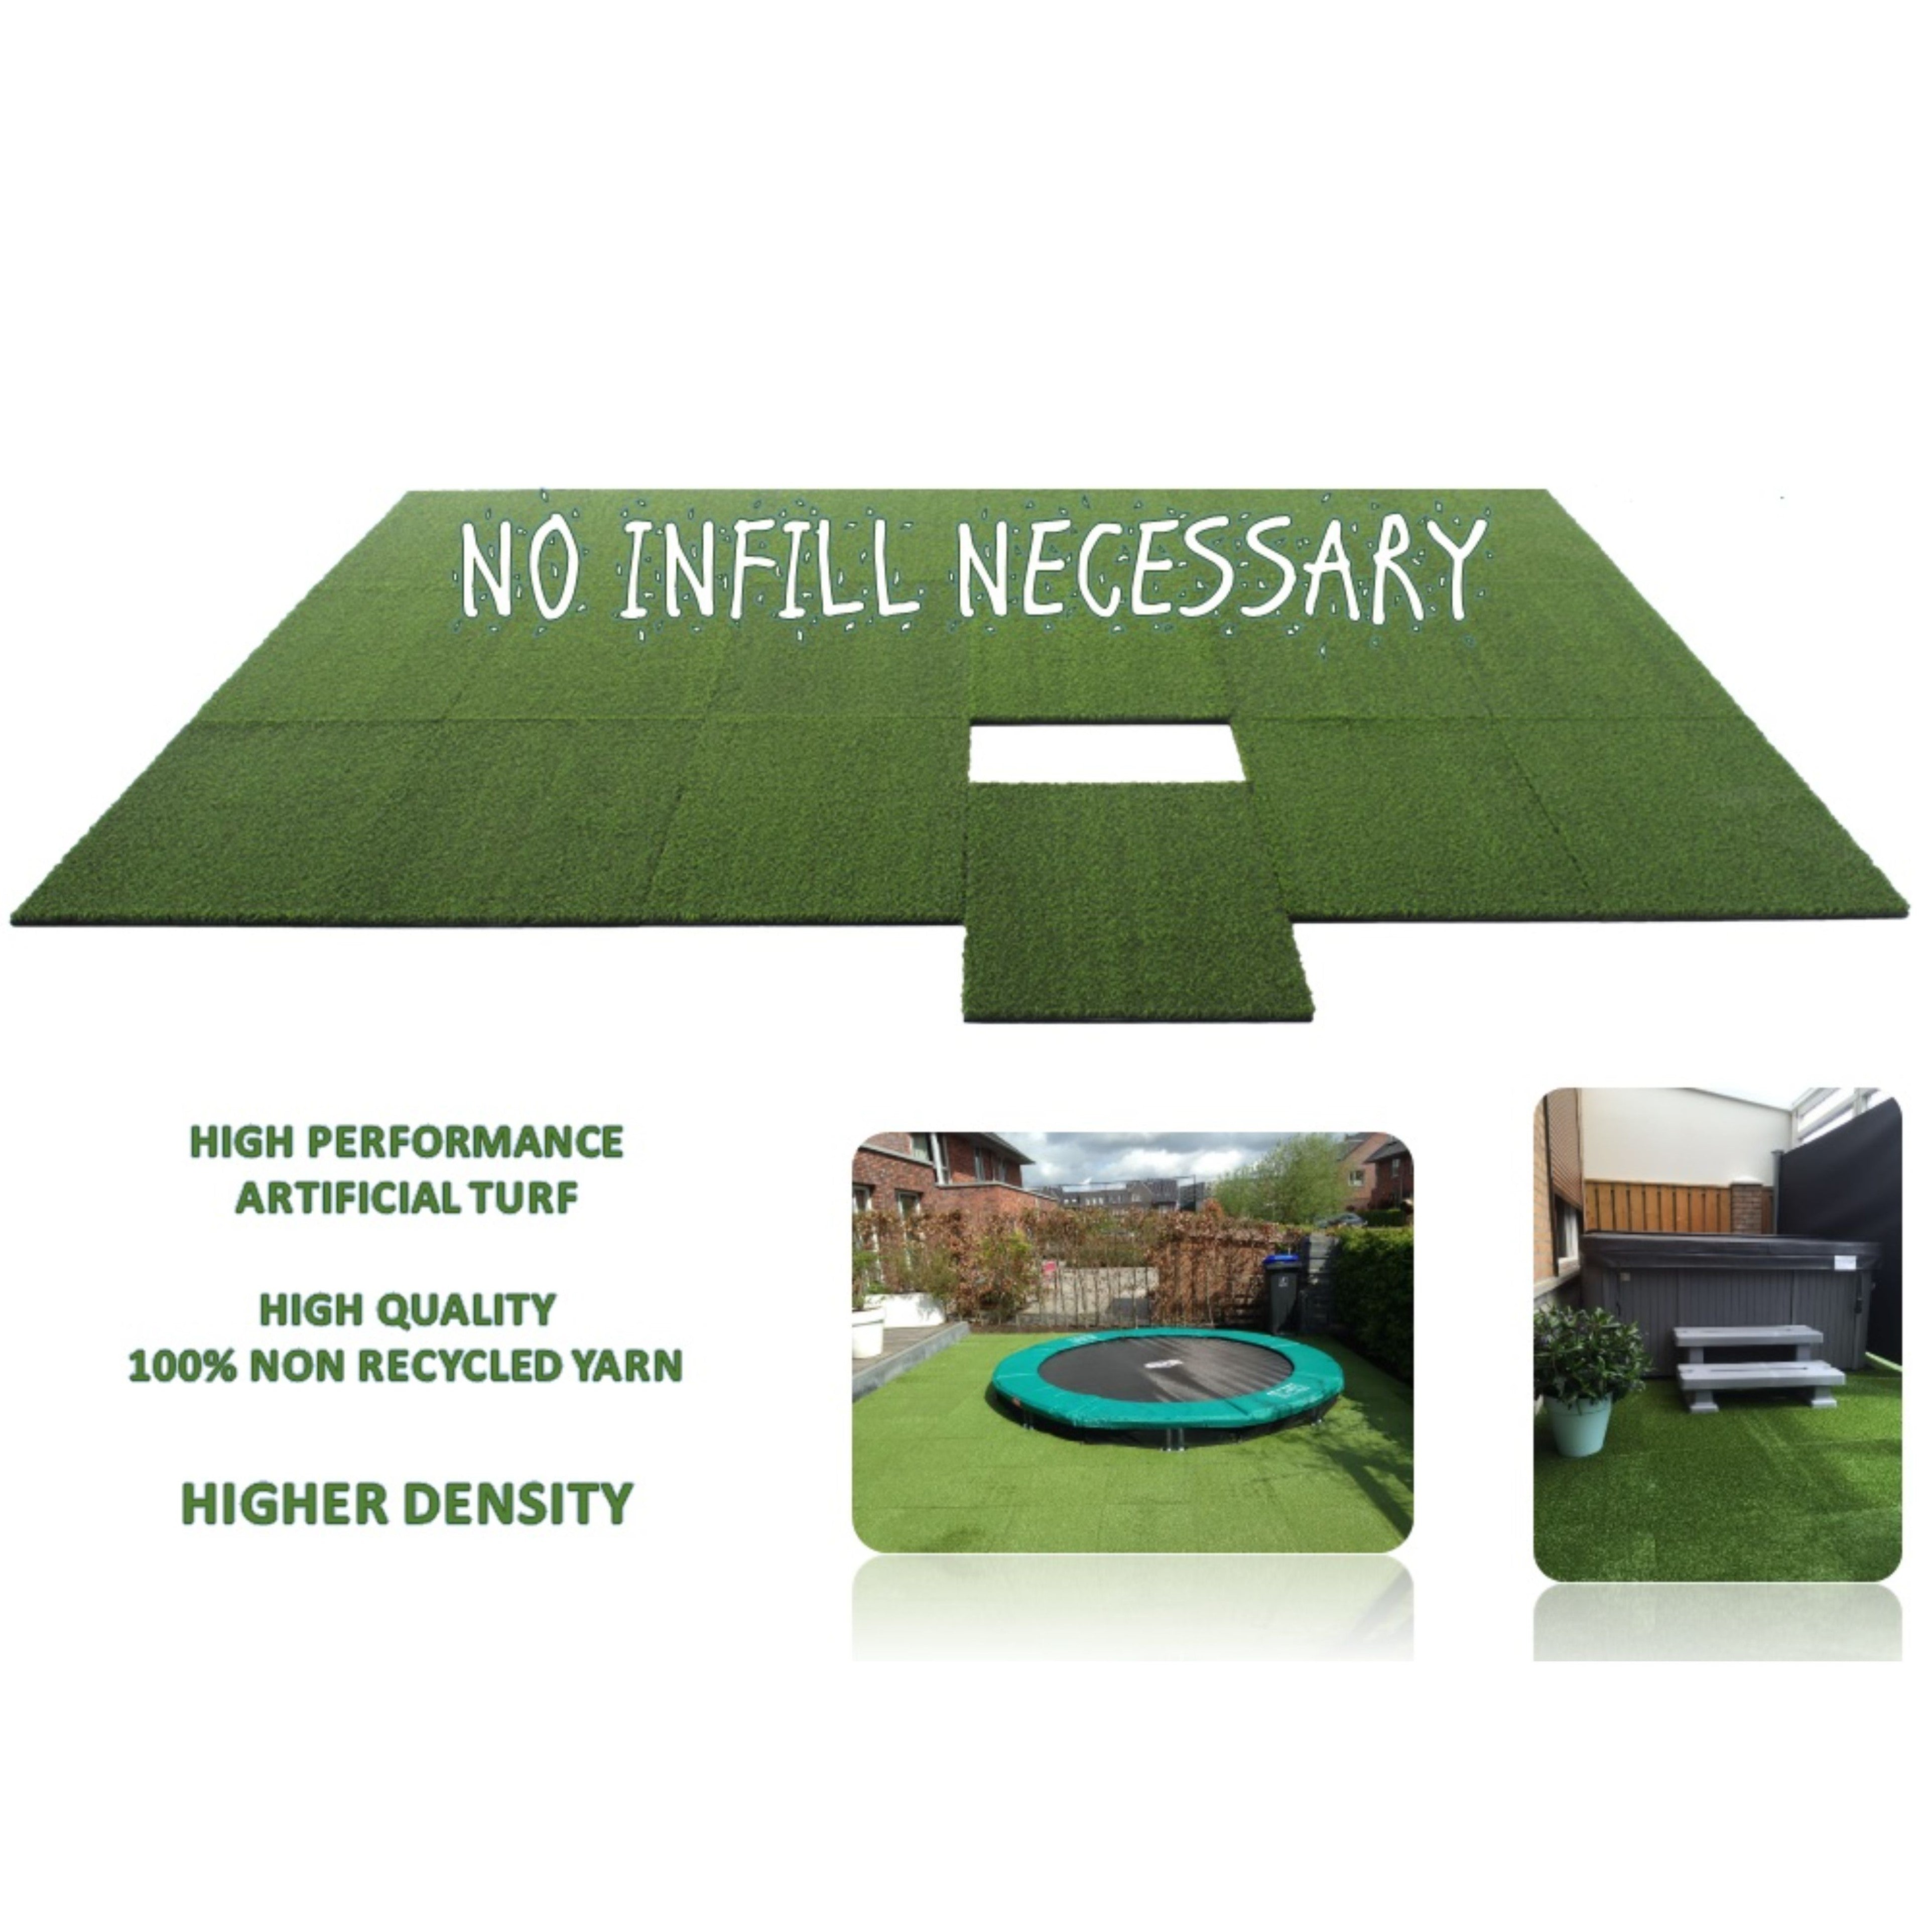 13m2 single garage package, Artificial Grass topped rubber floor tiles - Cannons UK